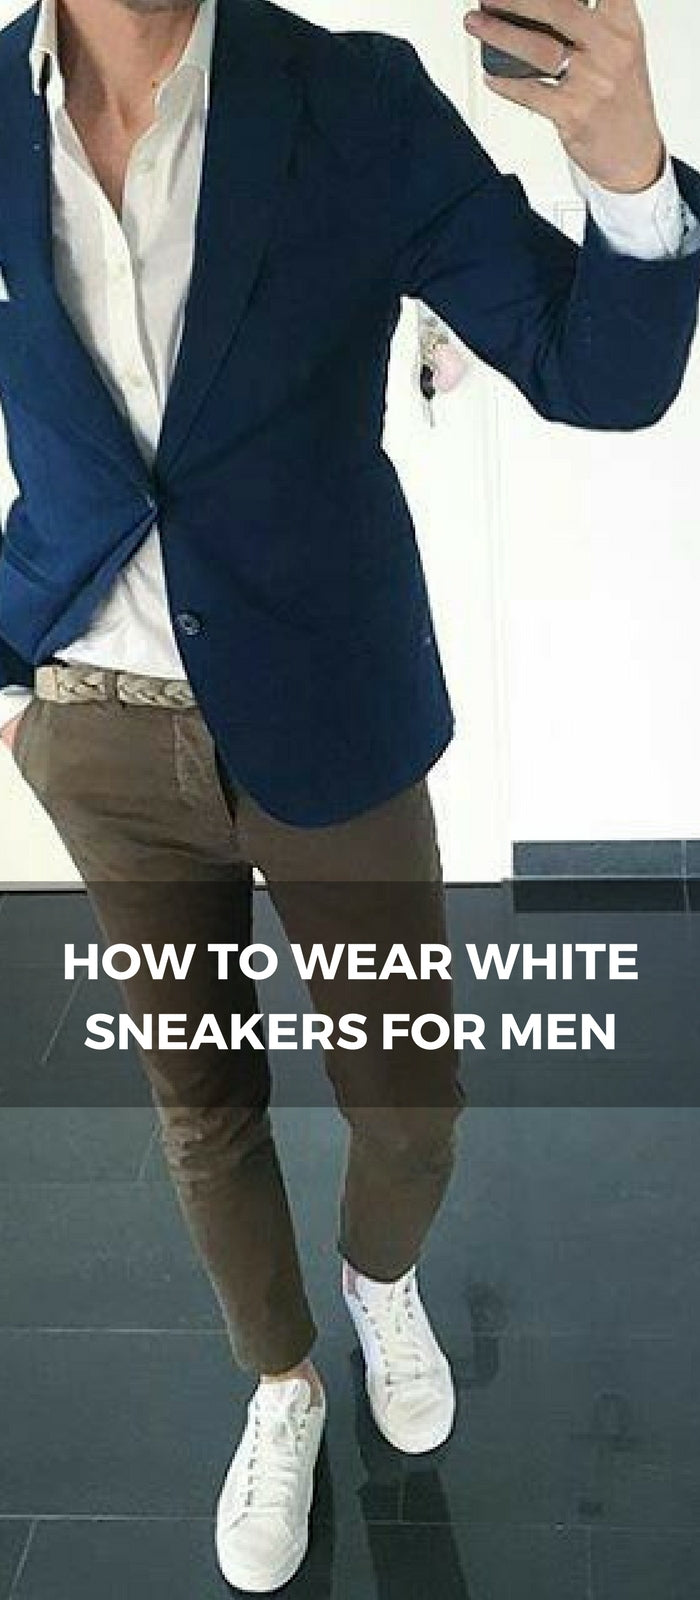 How to dress up white sneakers for men 